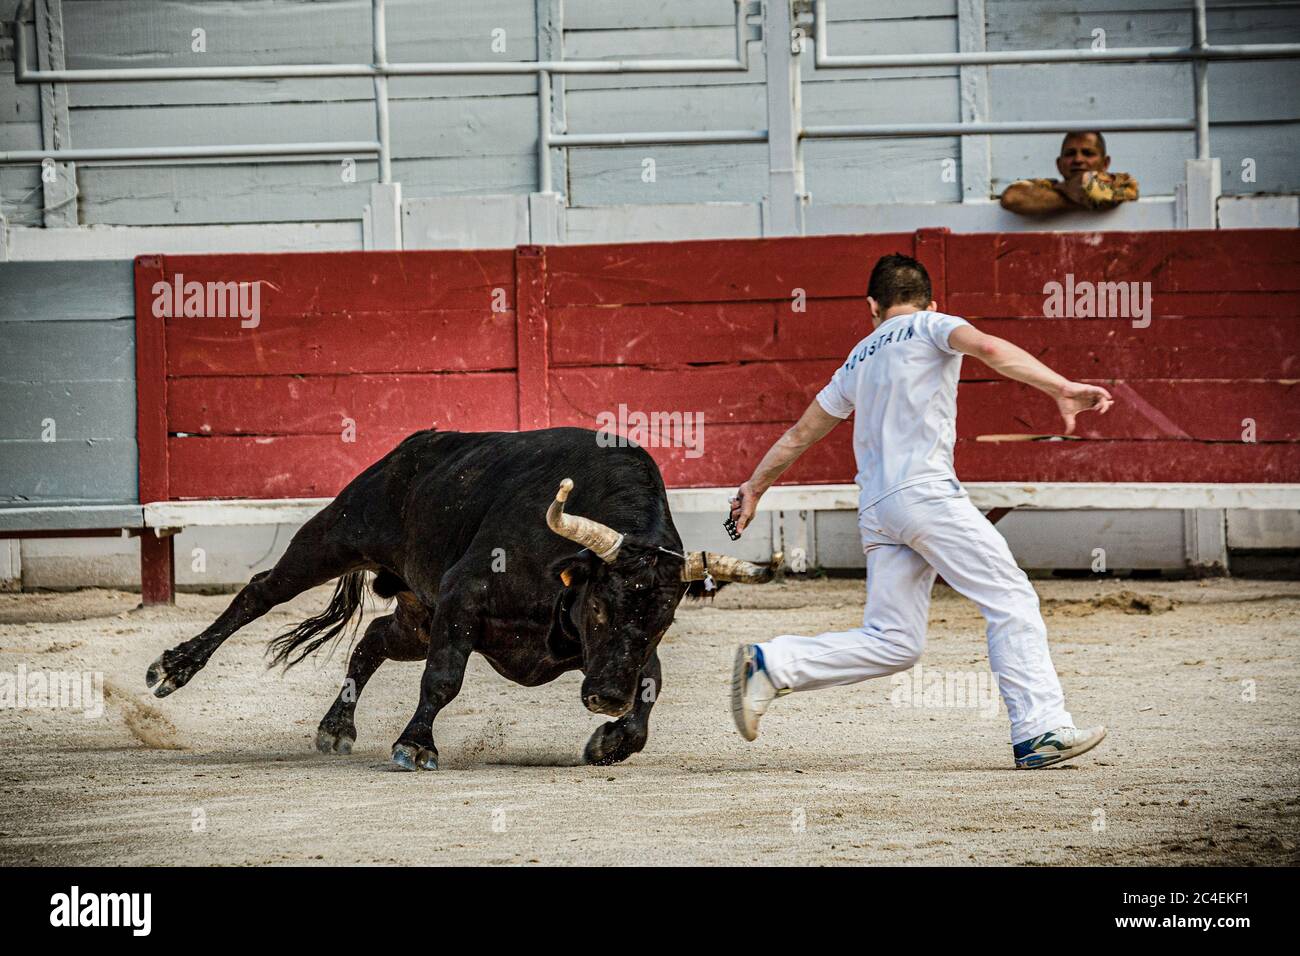 France Camargue - Arles - The Camarguese Courses is a non-violent bullfight that takes place mainly in the south of France, mainly in the Camargue. Stock Photo